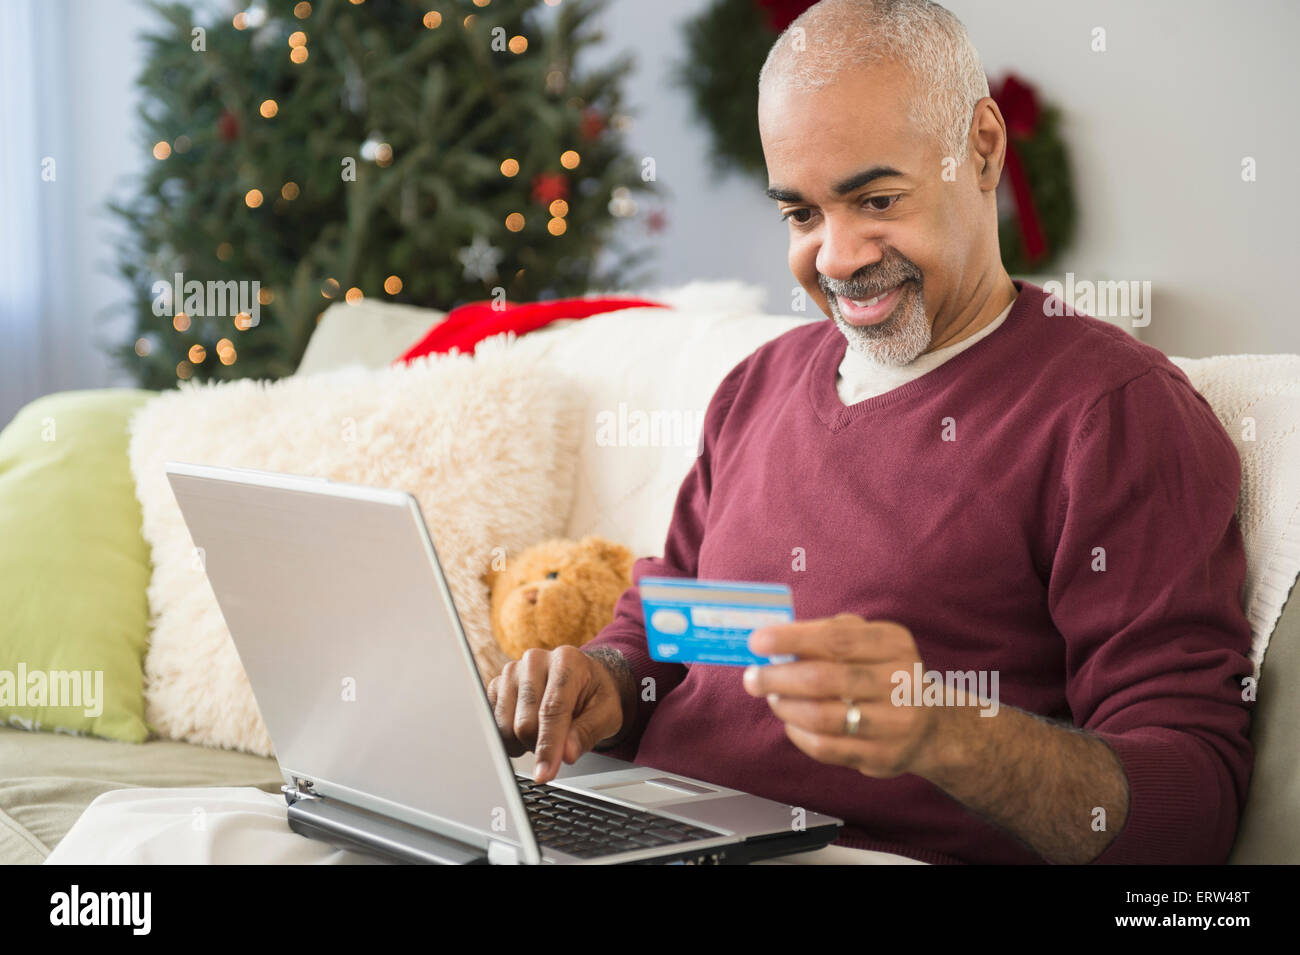 Mixed race man shopping online with laptop at Christmas Stock Photo